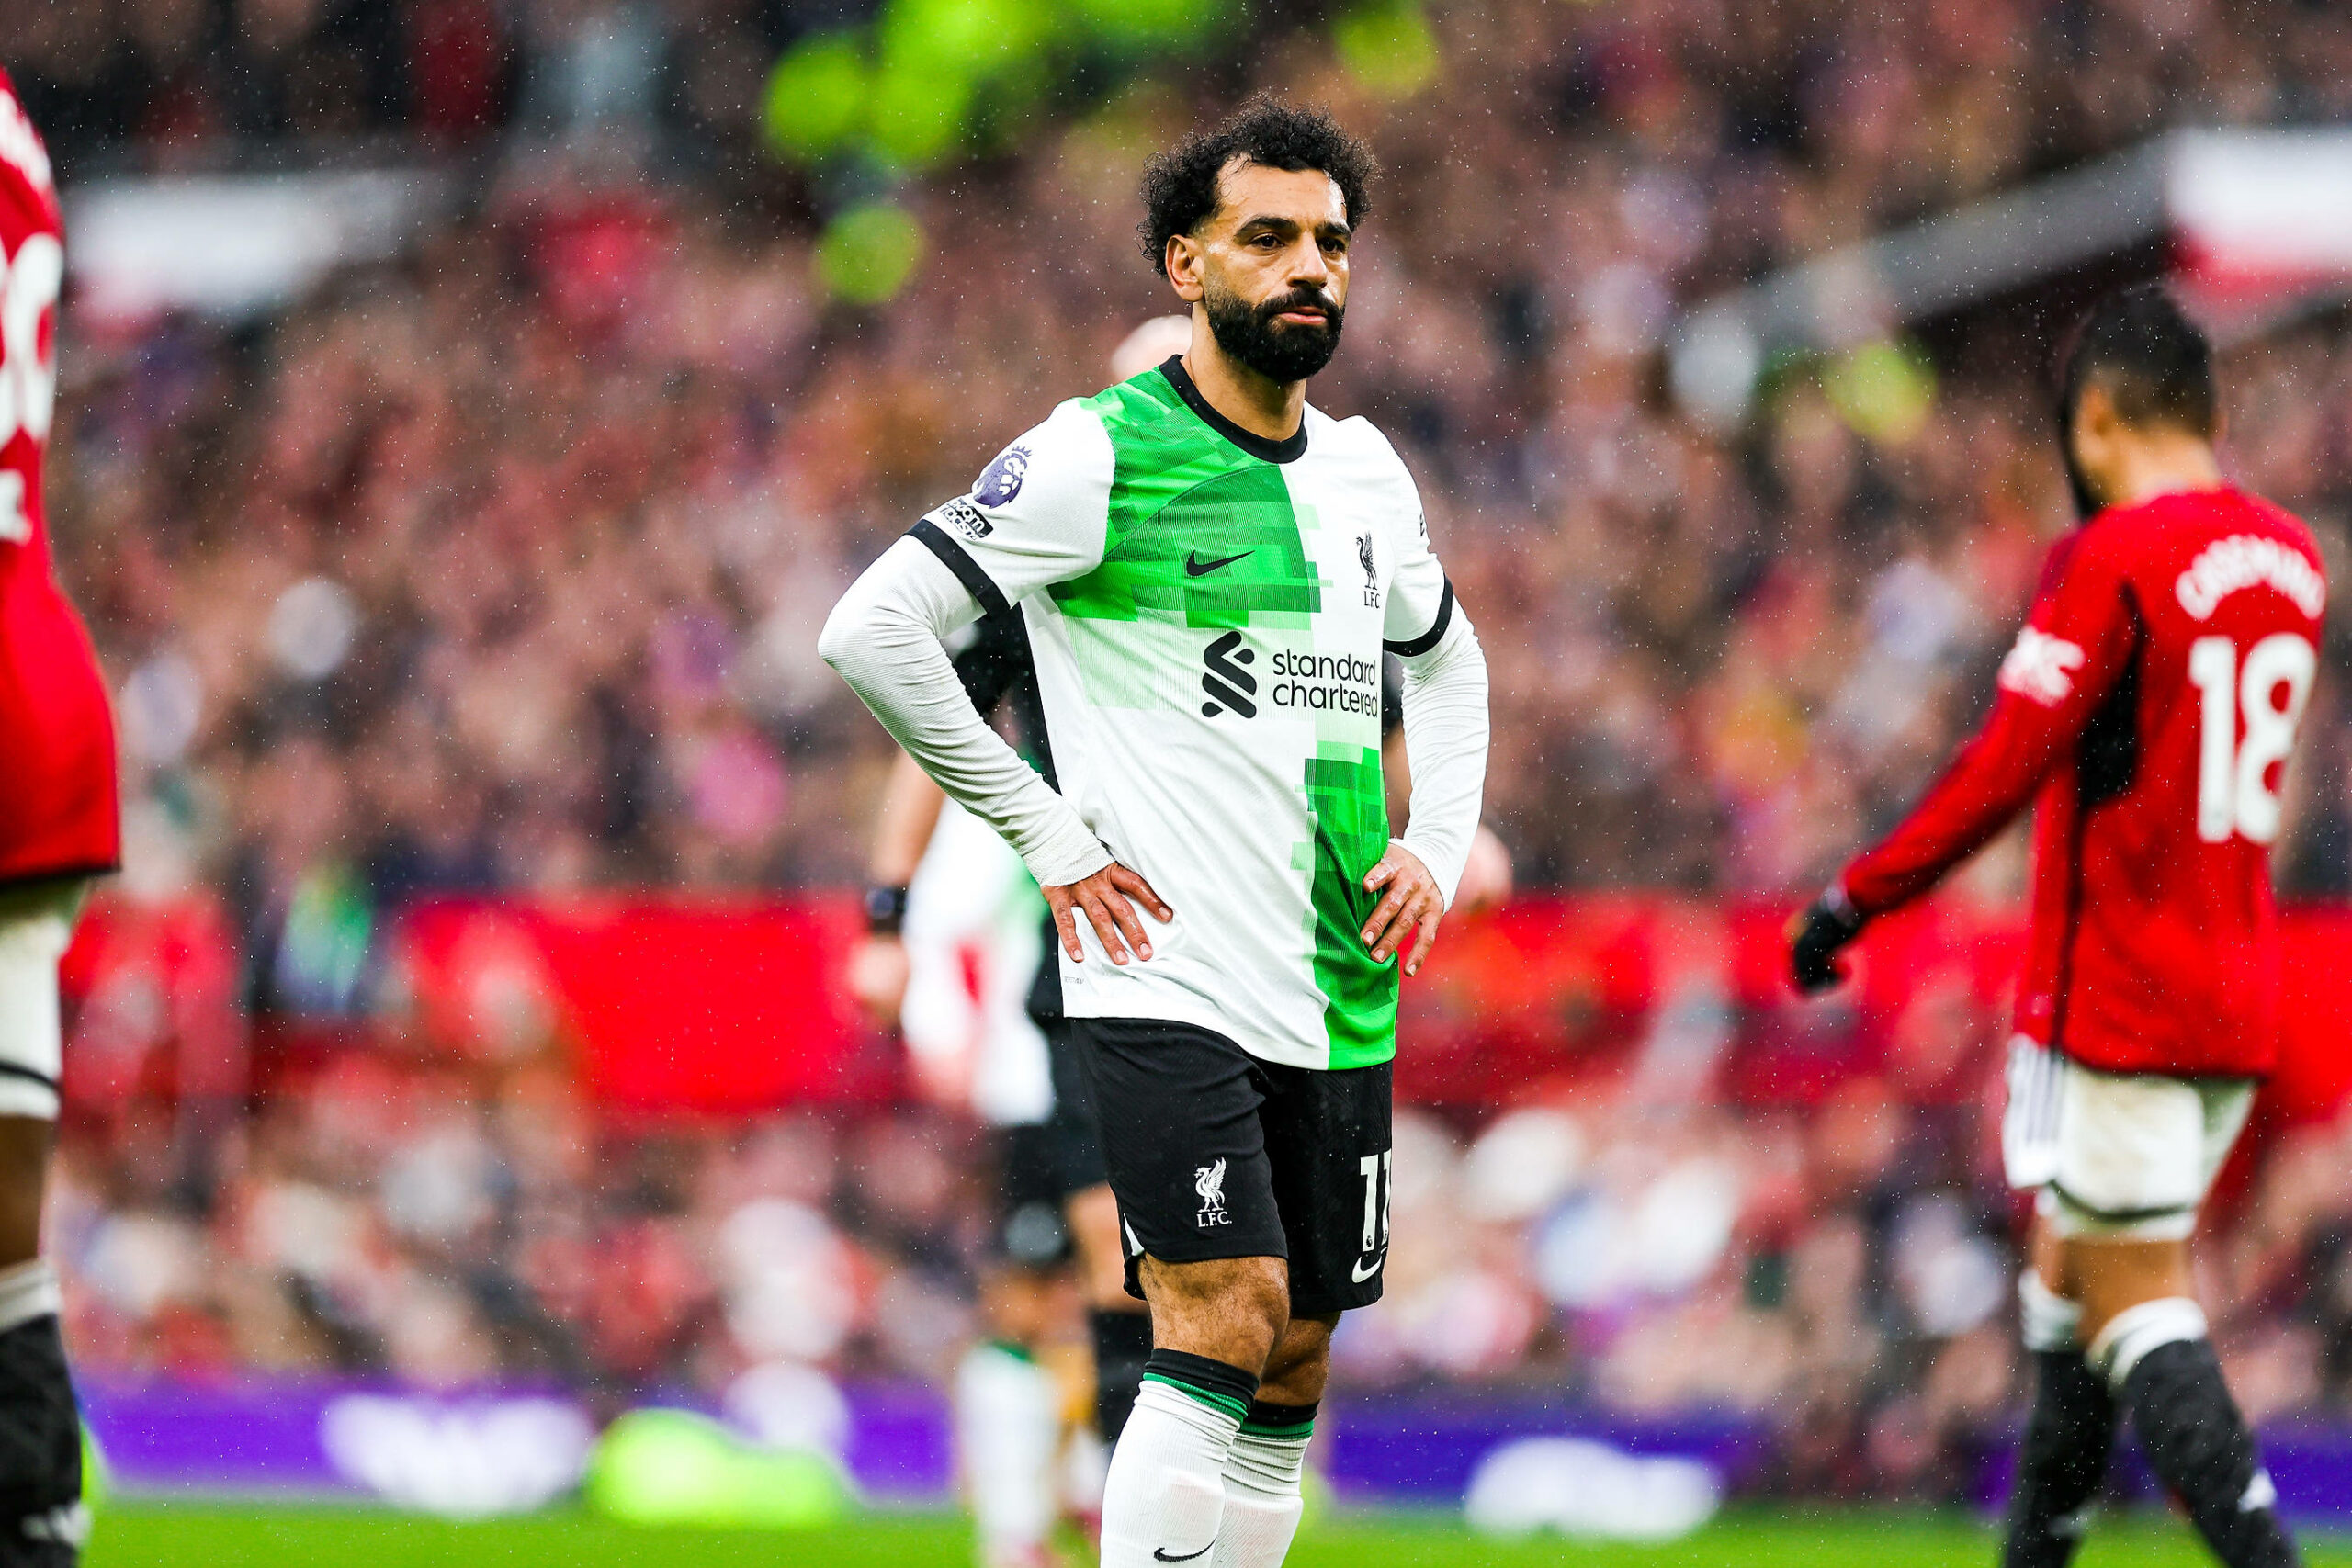 Analysing Mo Salah’s Current Form and Future at Liverpool